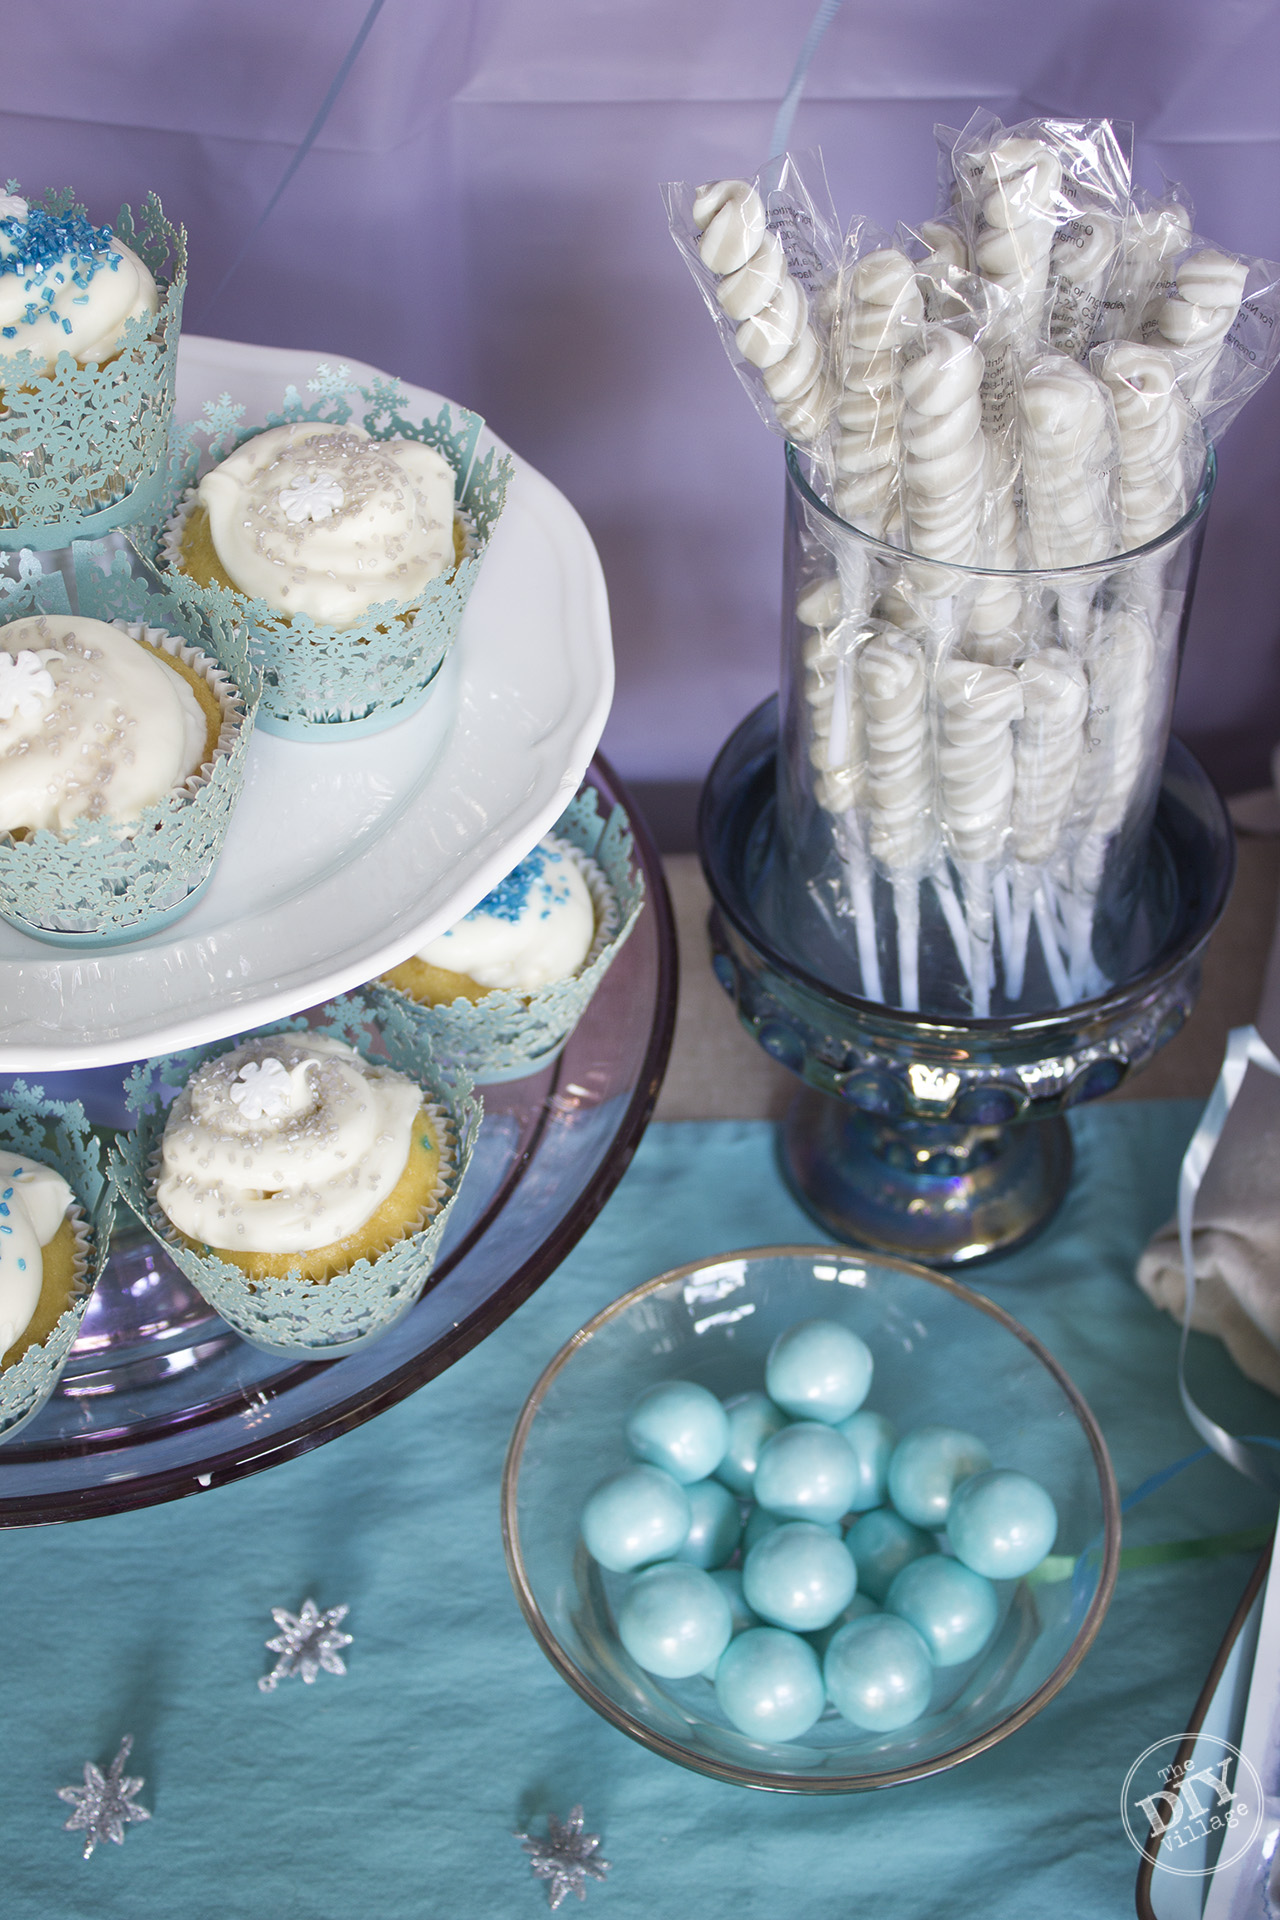 Elsa themed (Frozen) party ideas for the busy mom! So cute. 